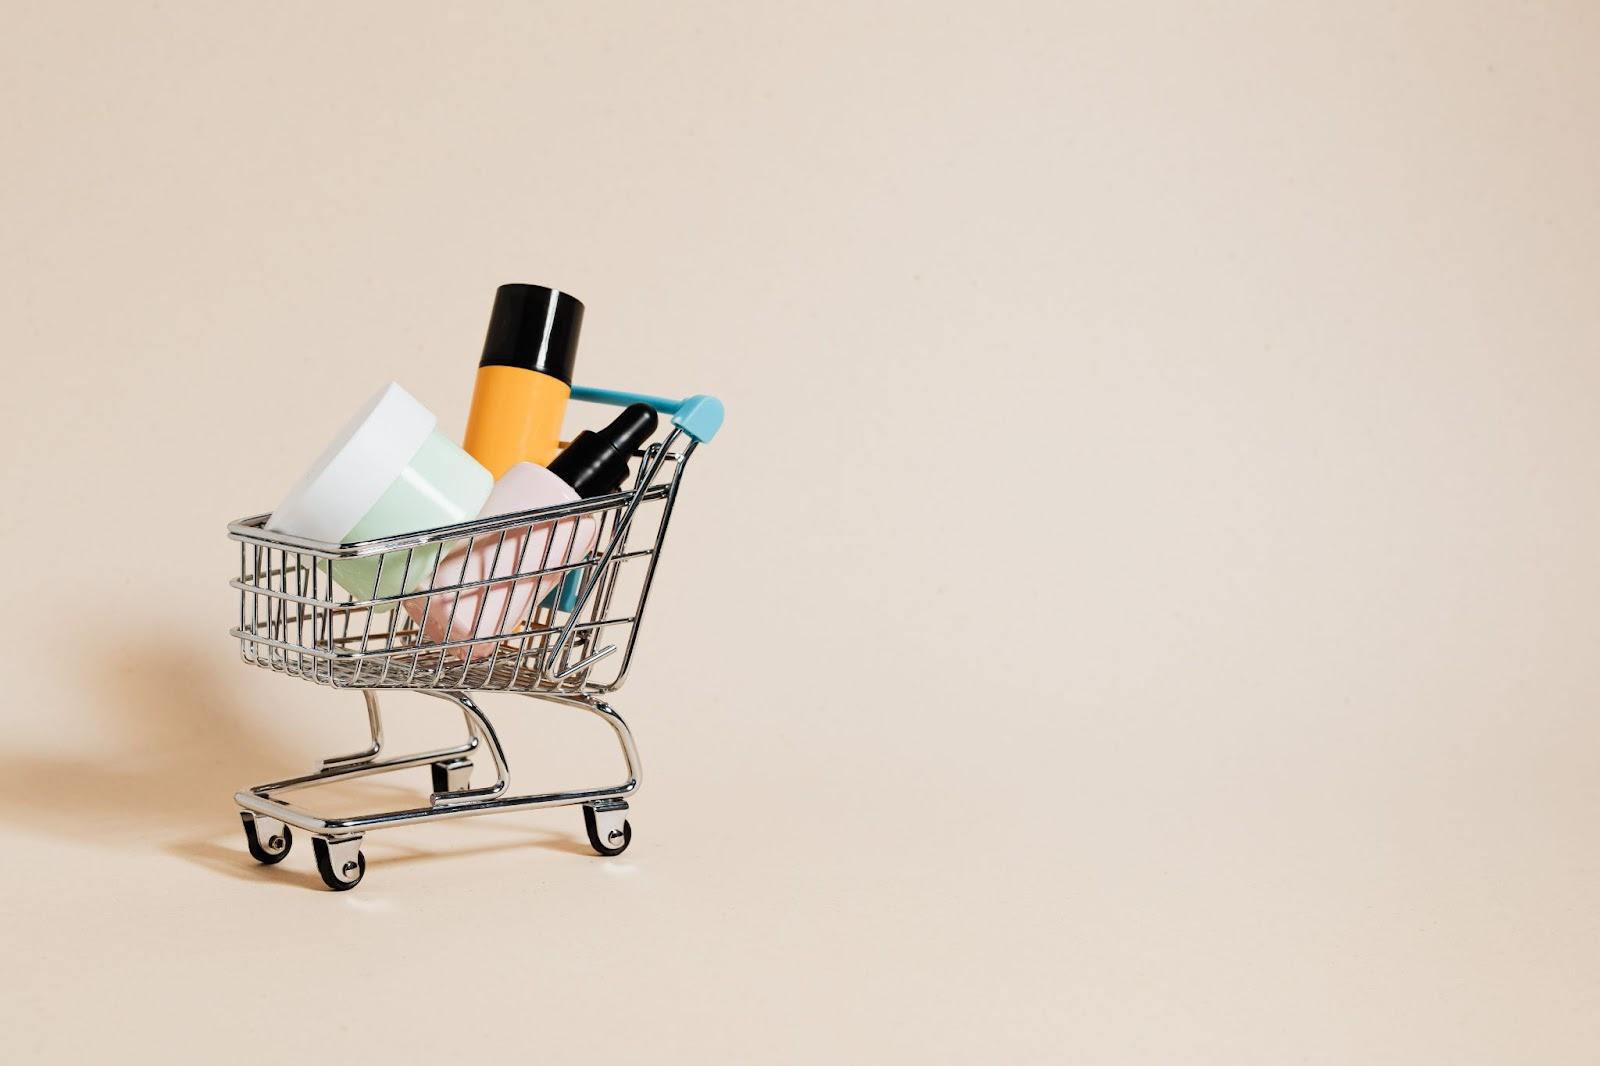 Abstract small shopping cart filled with products in a beige background